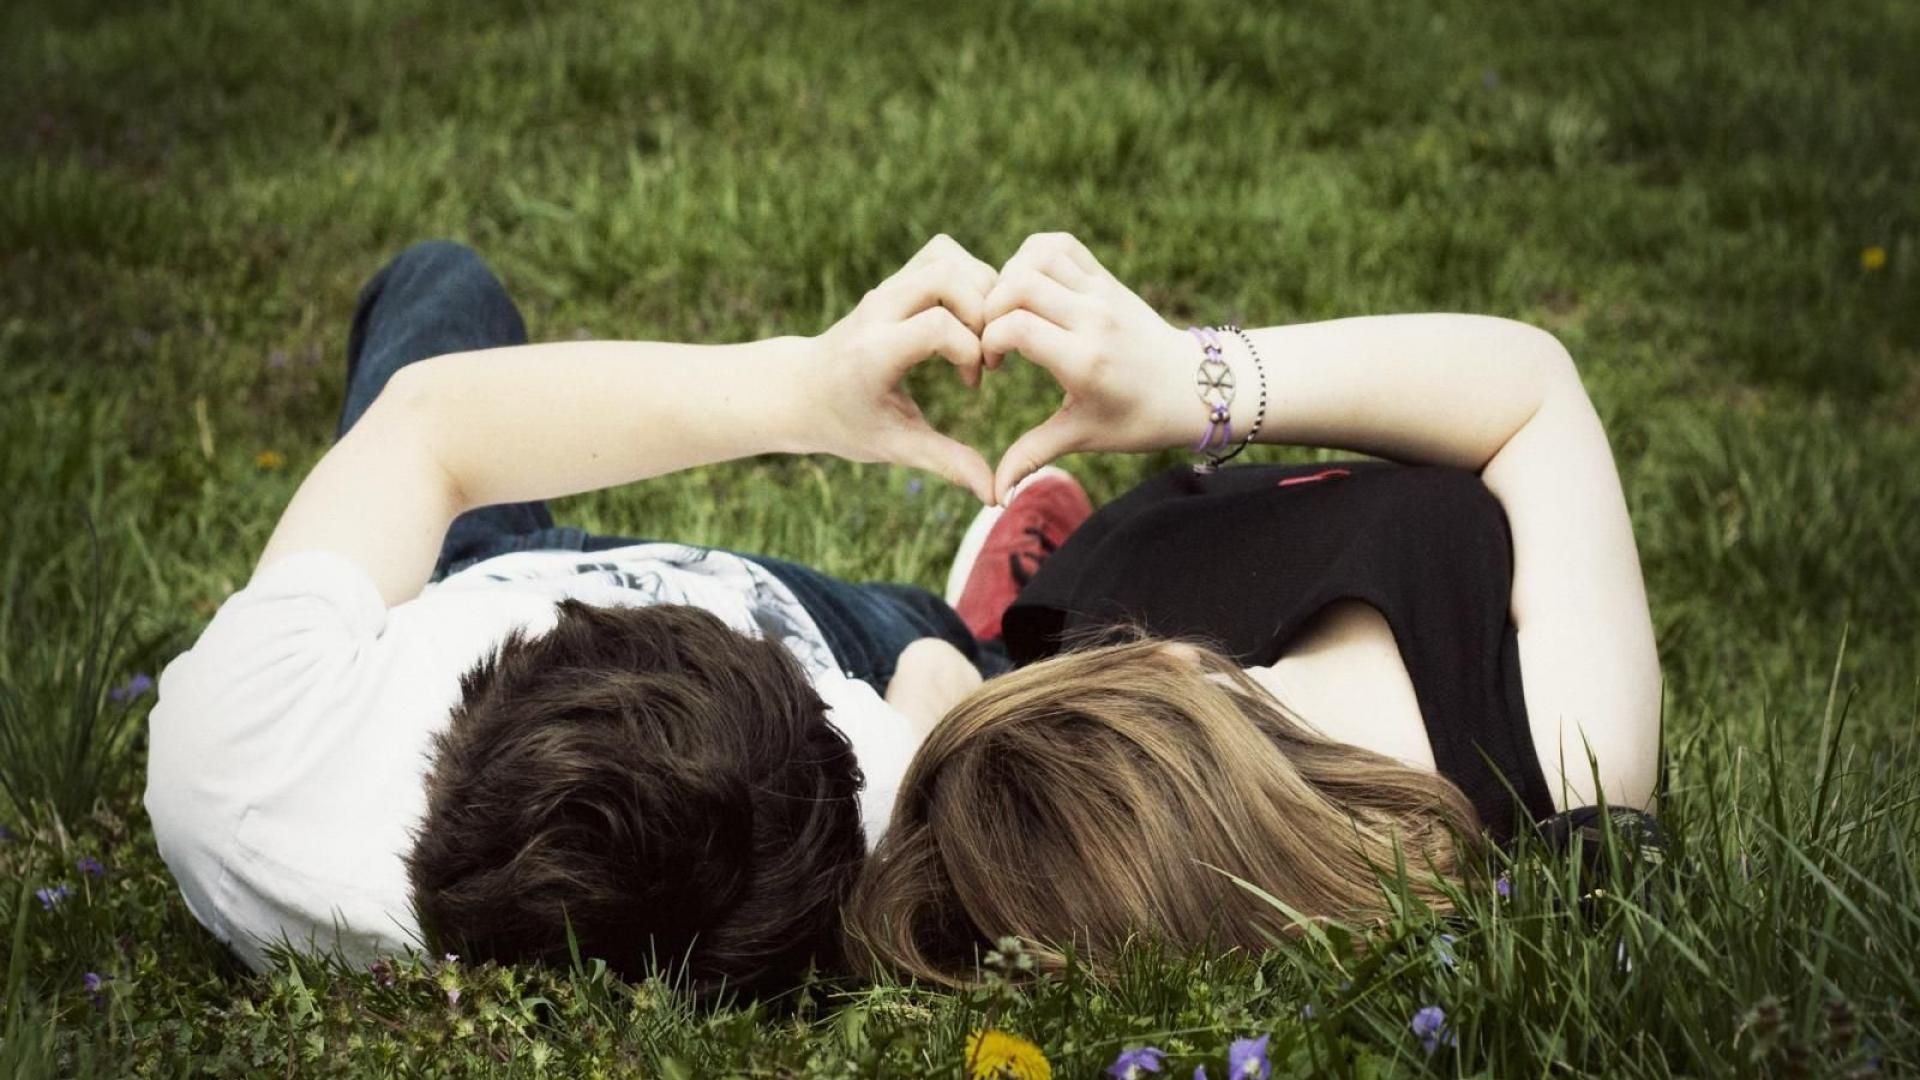 Romantic Images Of Love Hd Download - Romantic Pic Hd Download , HD Wallpaper & Backgrounds